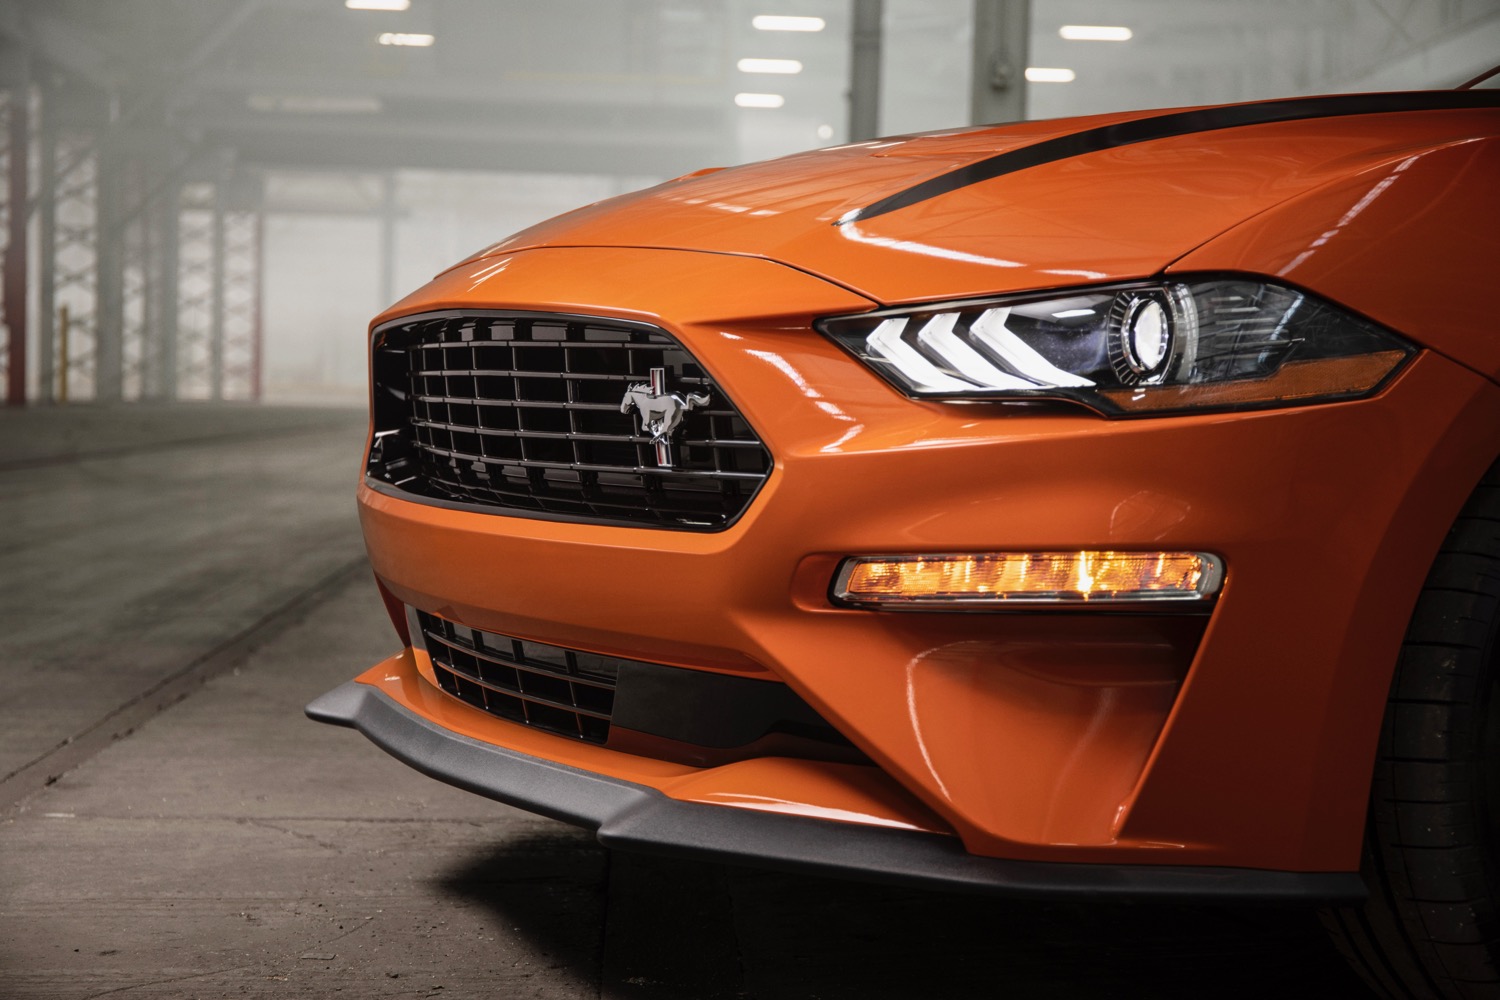 2020 Ford Mustang EcoBoost High Performance Package